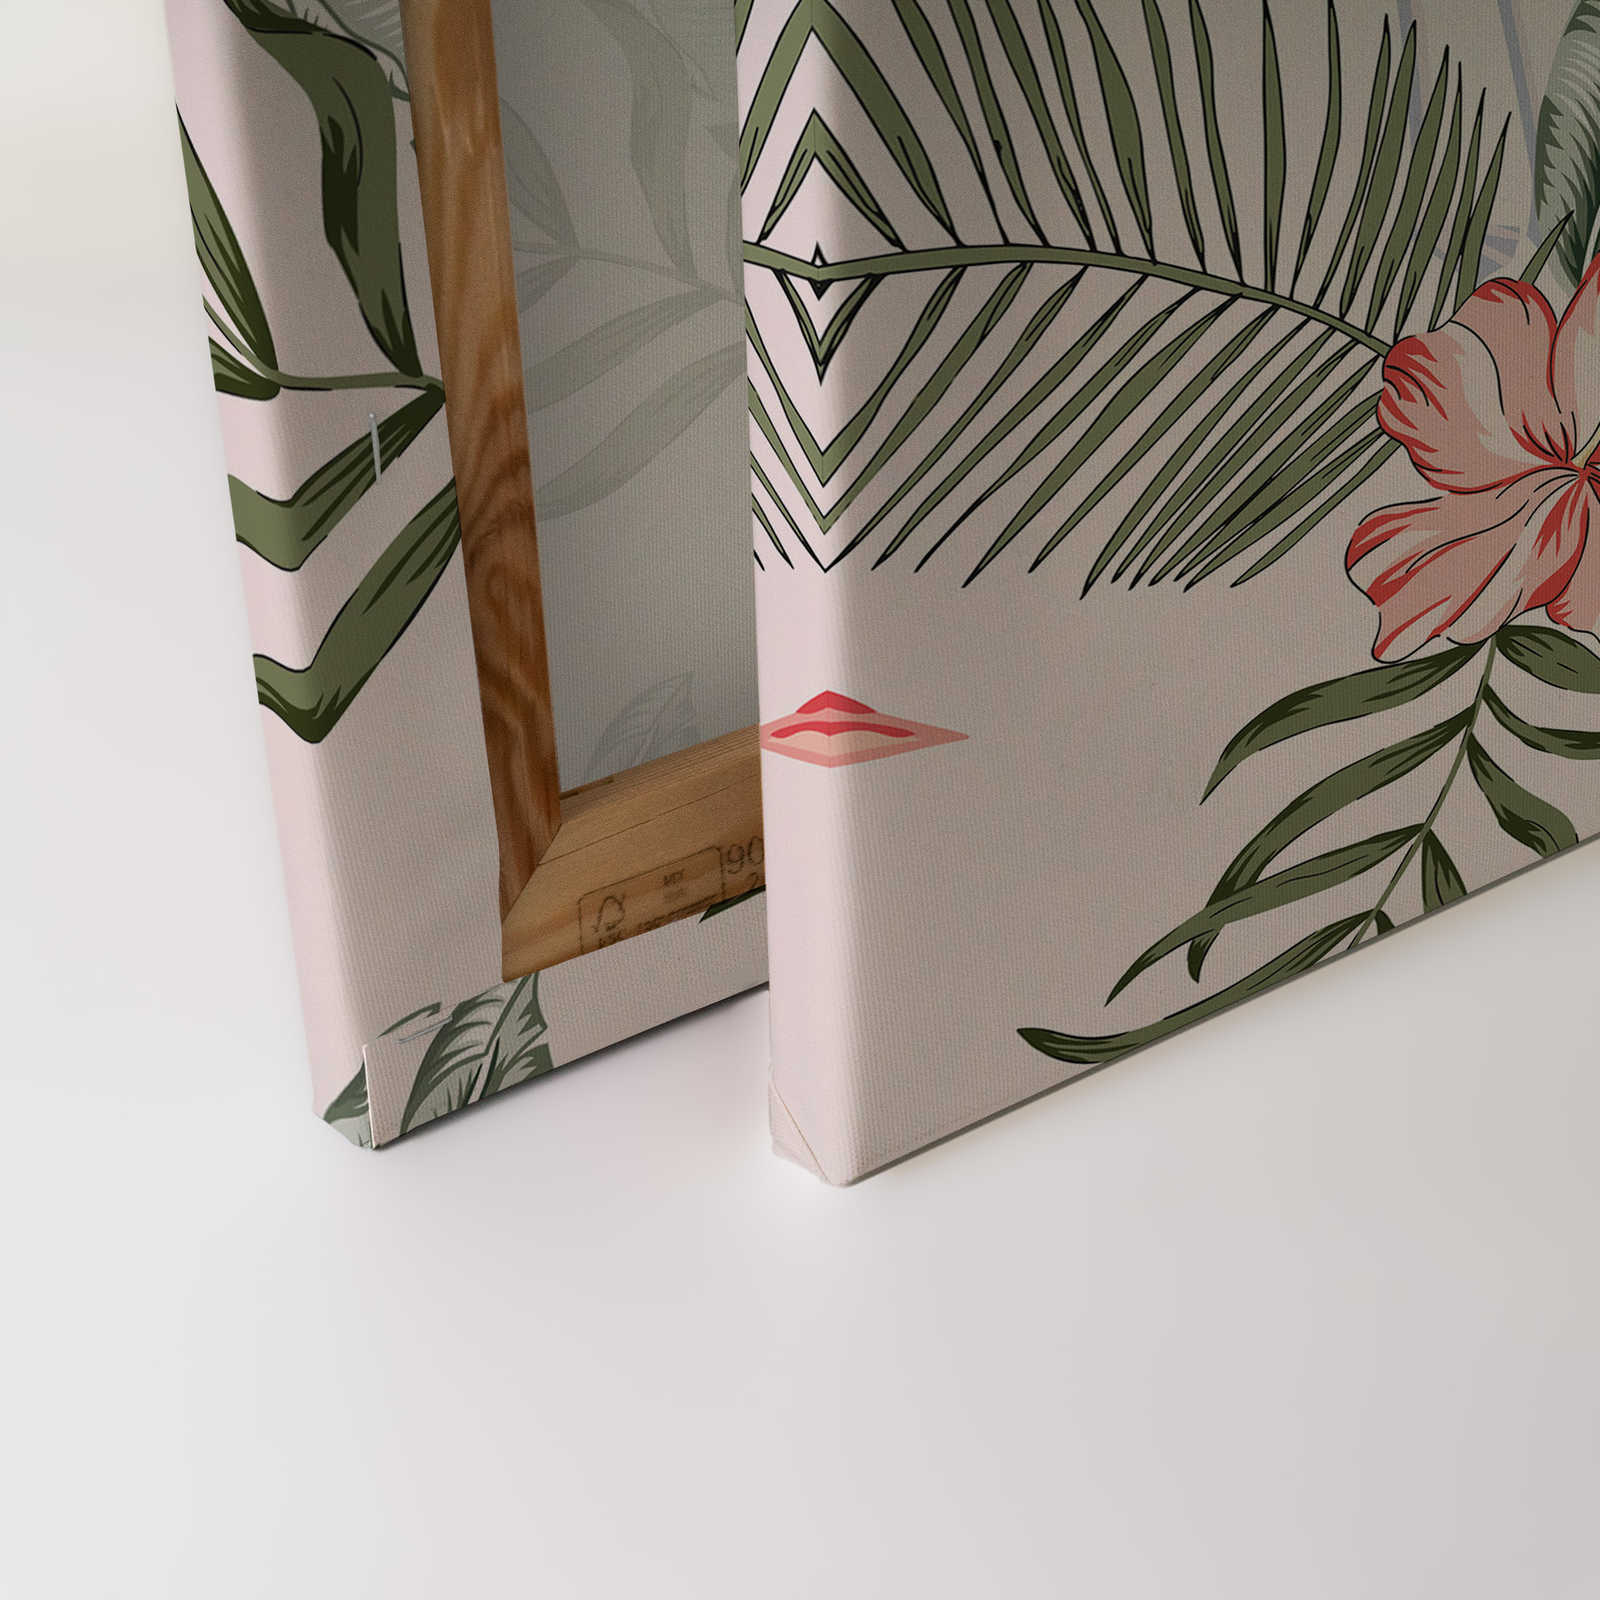             Canvas with flamingos and tropical plants - 0.90 m x 0.60 m
        